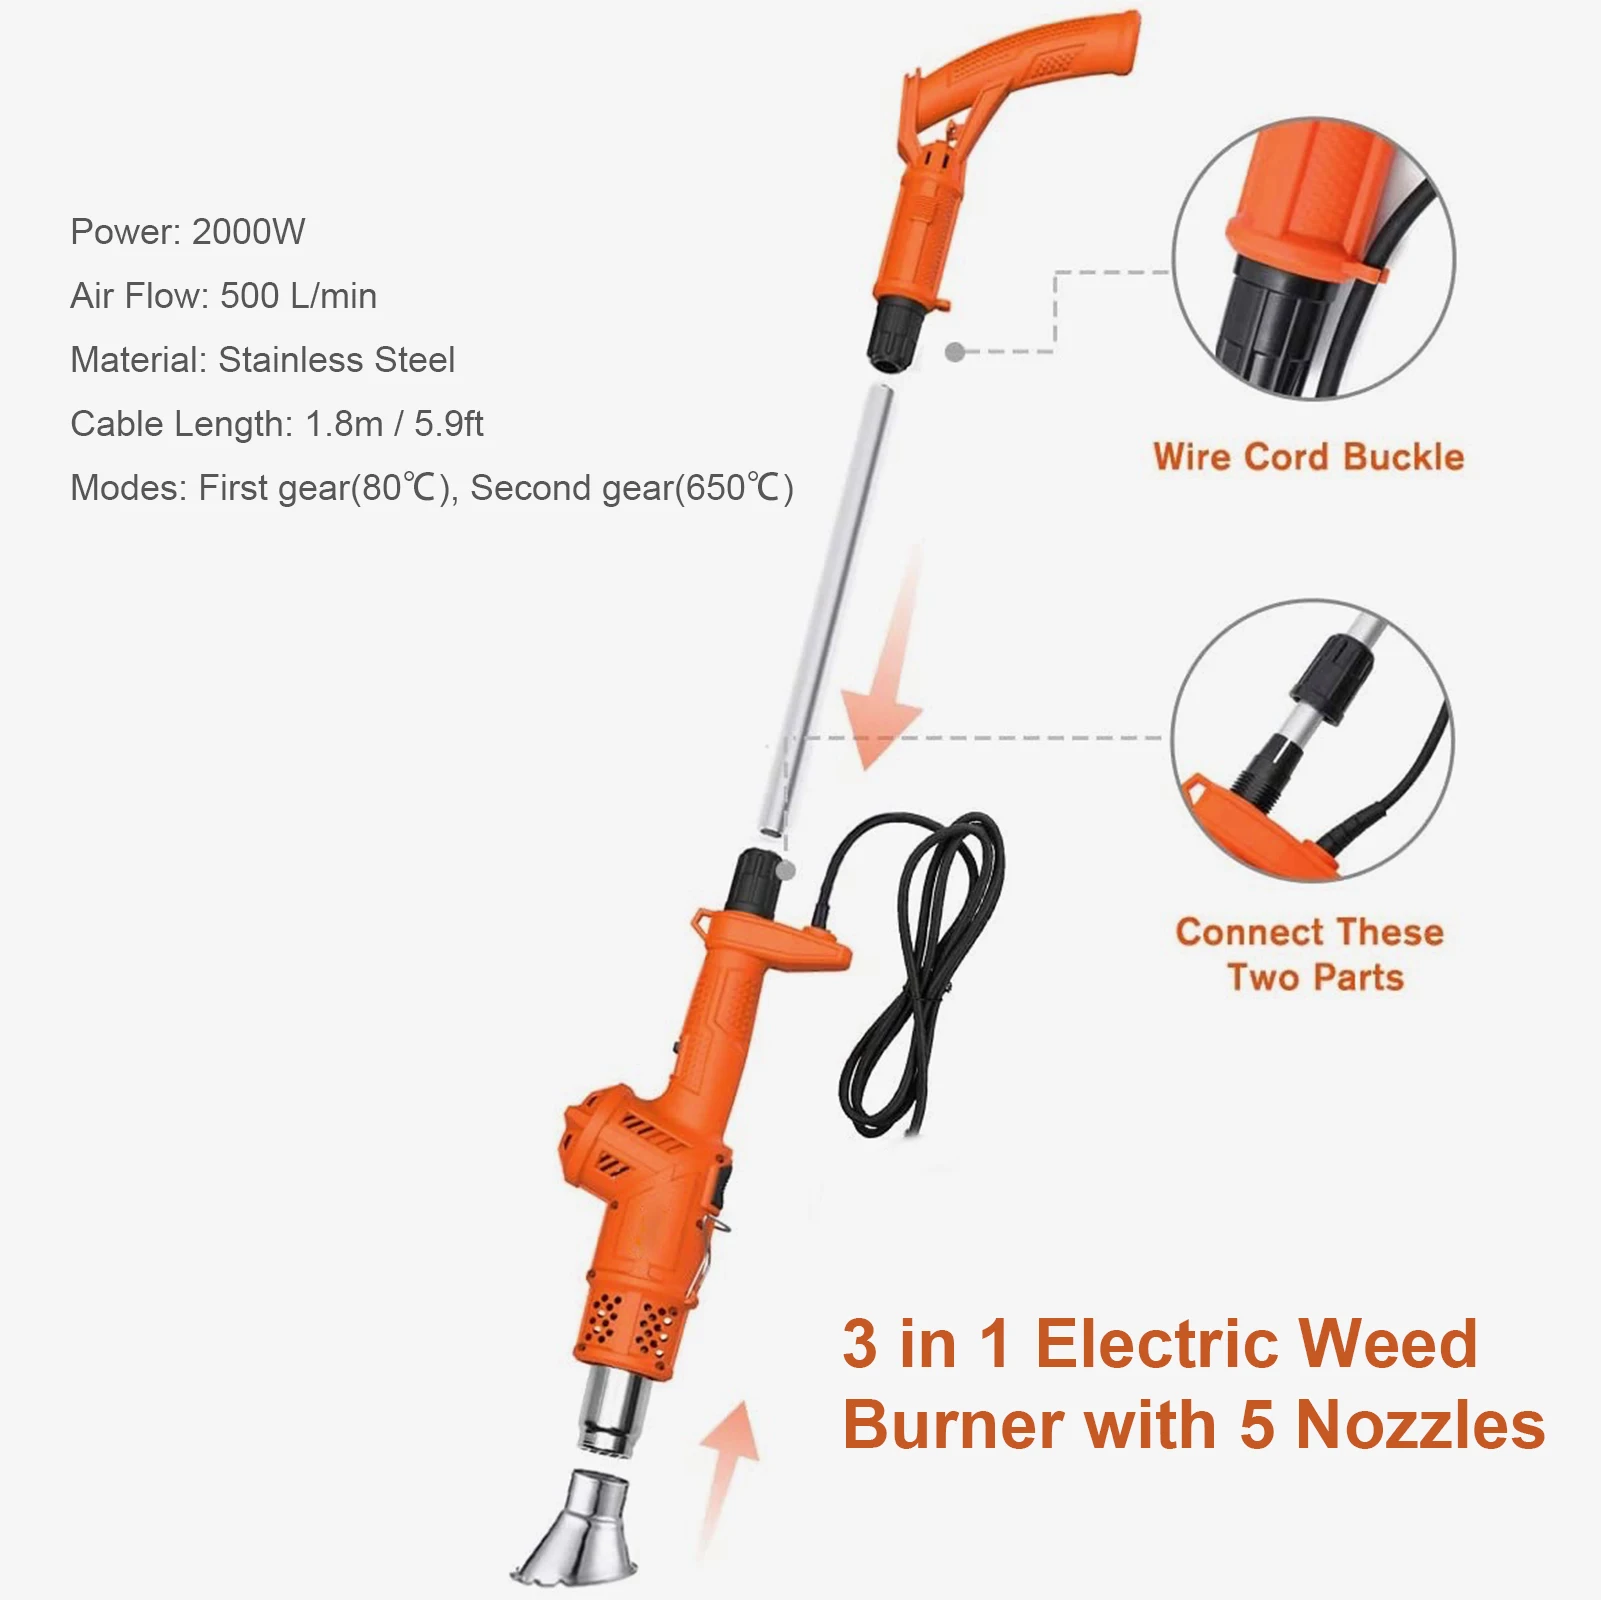 DYRABREST Electric Weed Burner 3 in 1 Hot Air Weed Torch Barbecue Lighter Garden Gear Weed Burner with 5 Types of Nozzle 60℃-650℃ Strong Weed Tool Thermal Weeding Stick 